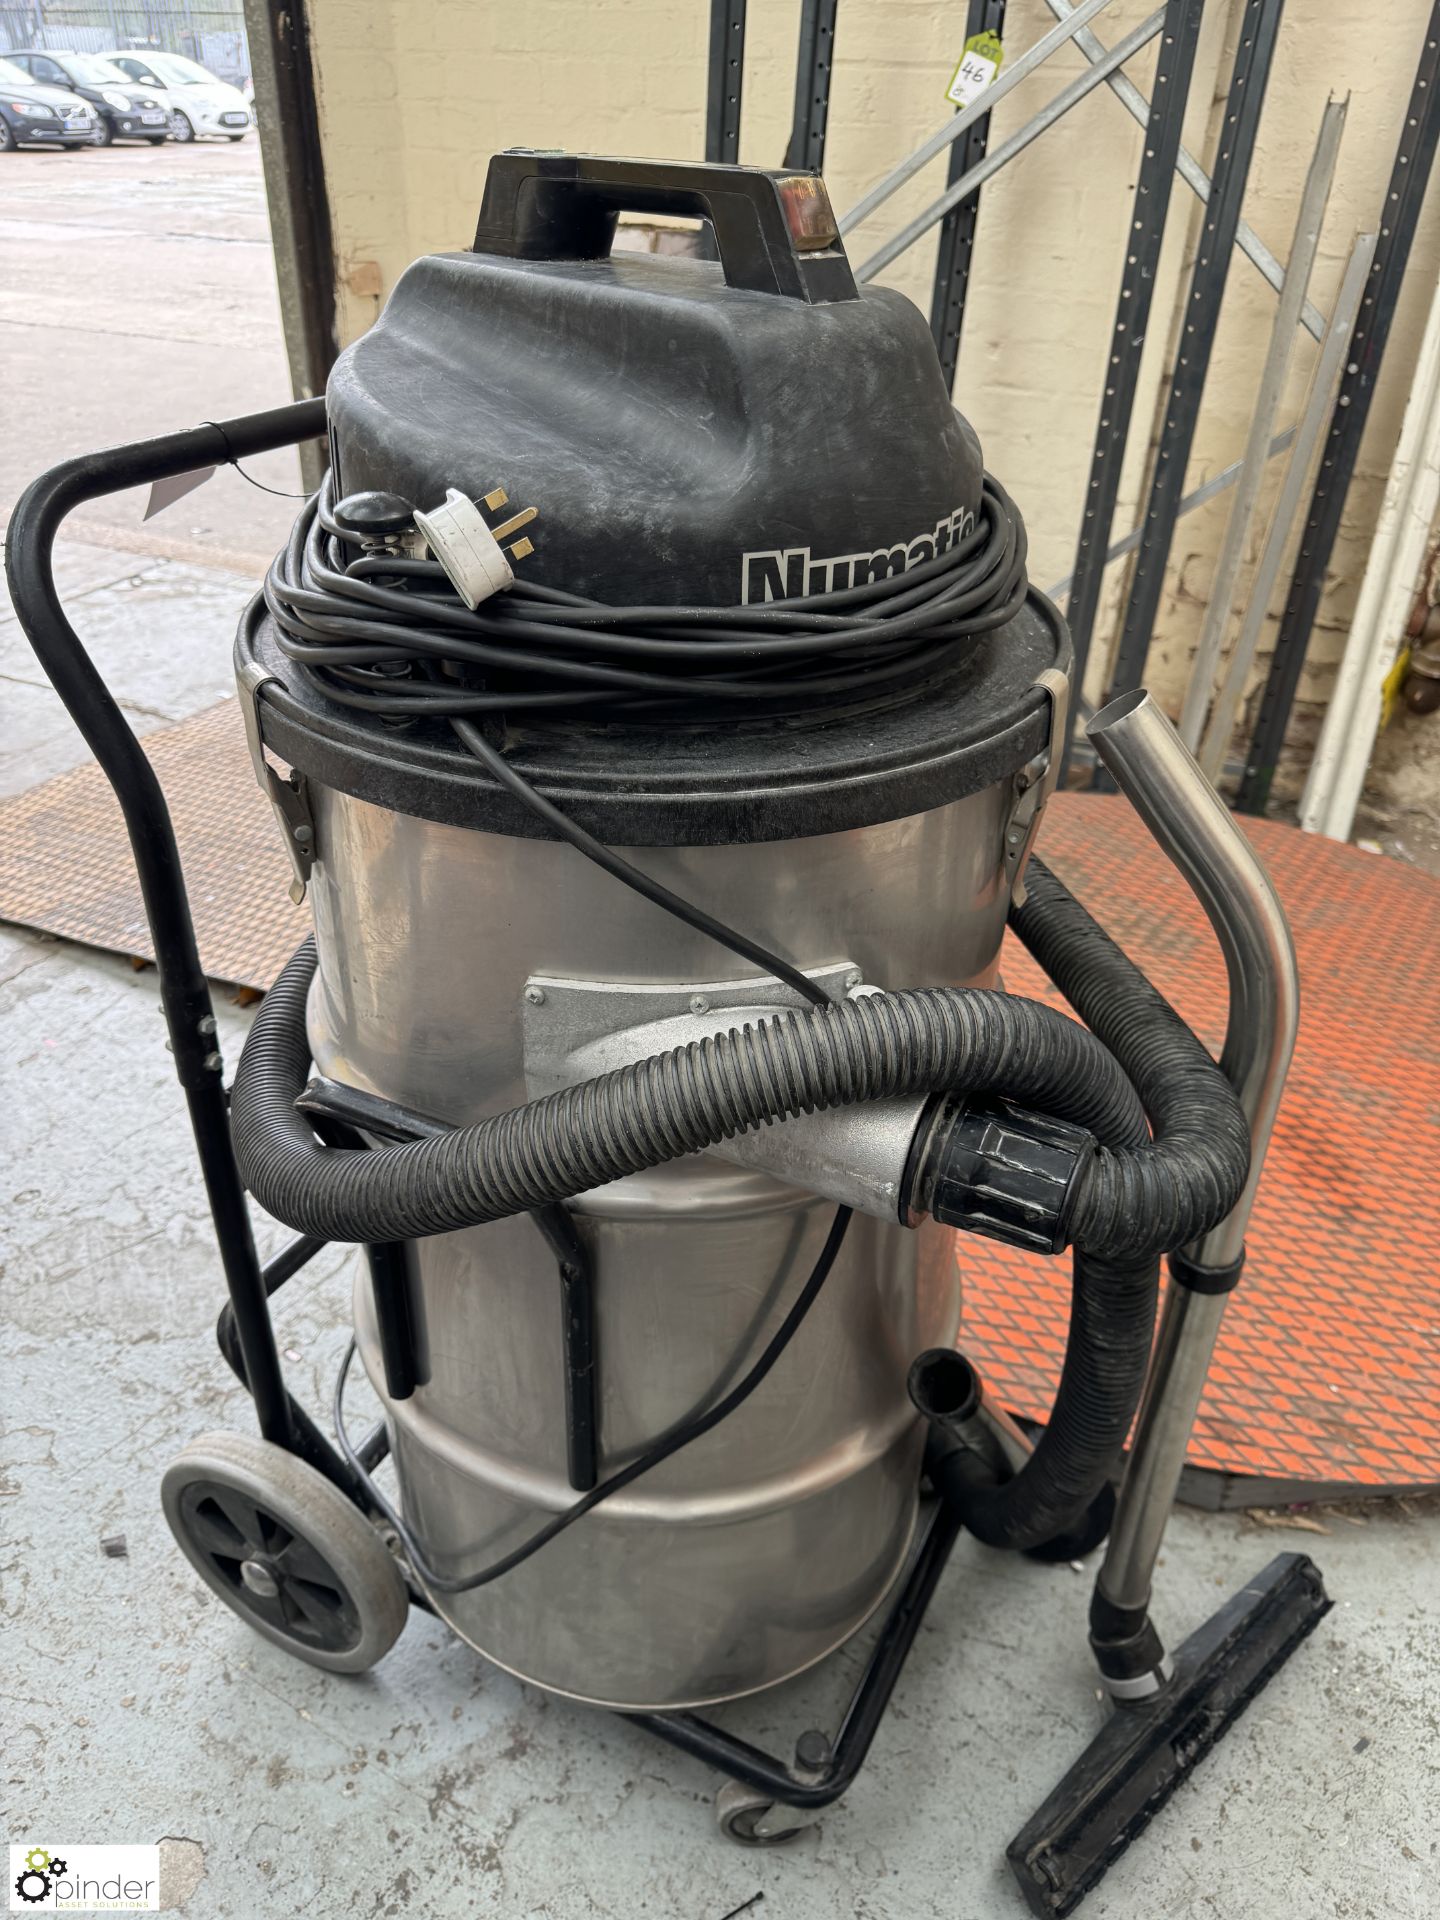 Numatic NTD2003 Industrial Vacuum with hose and attachments, 240volts - Image 3 of 5